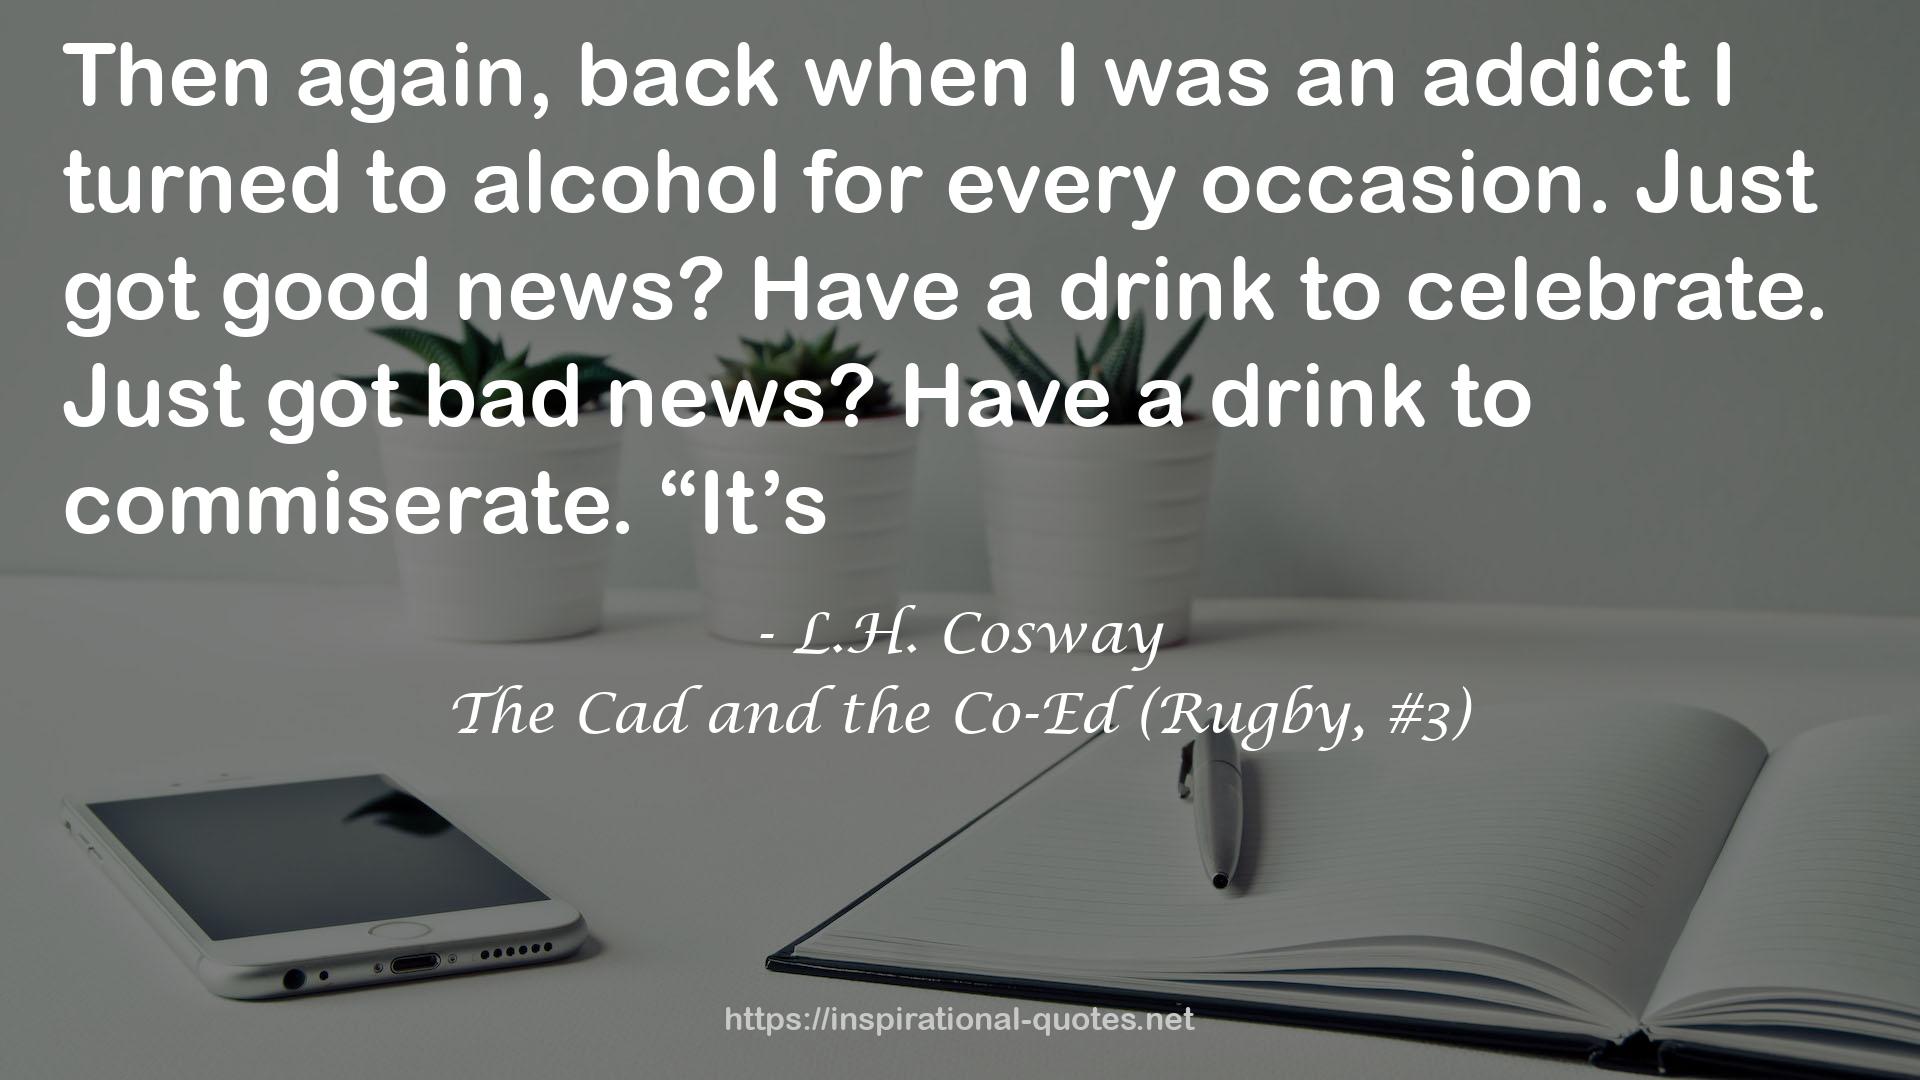 The Cad and the Co-Ed (Rugby, #3) QUOTES